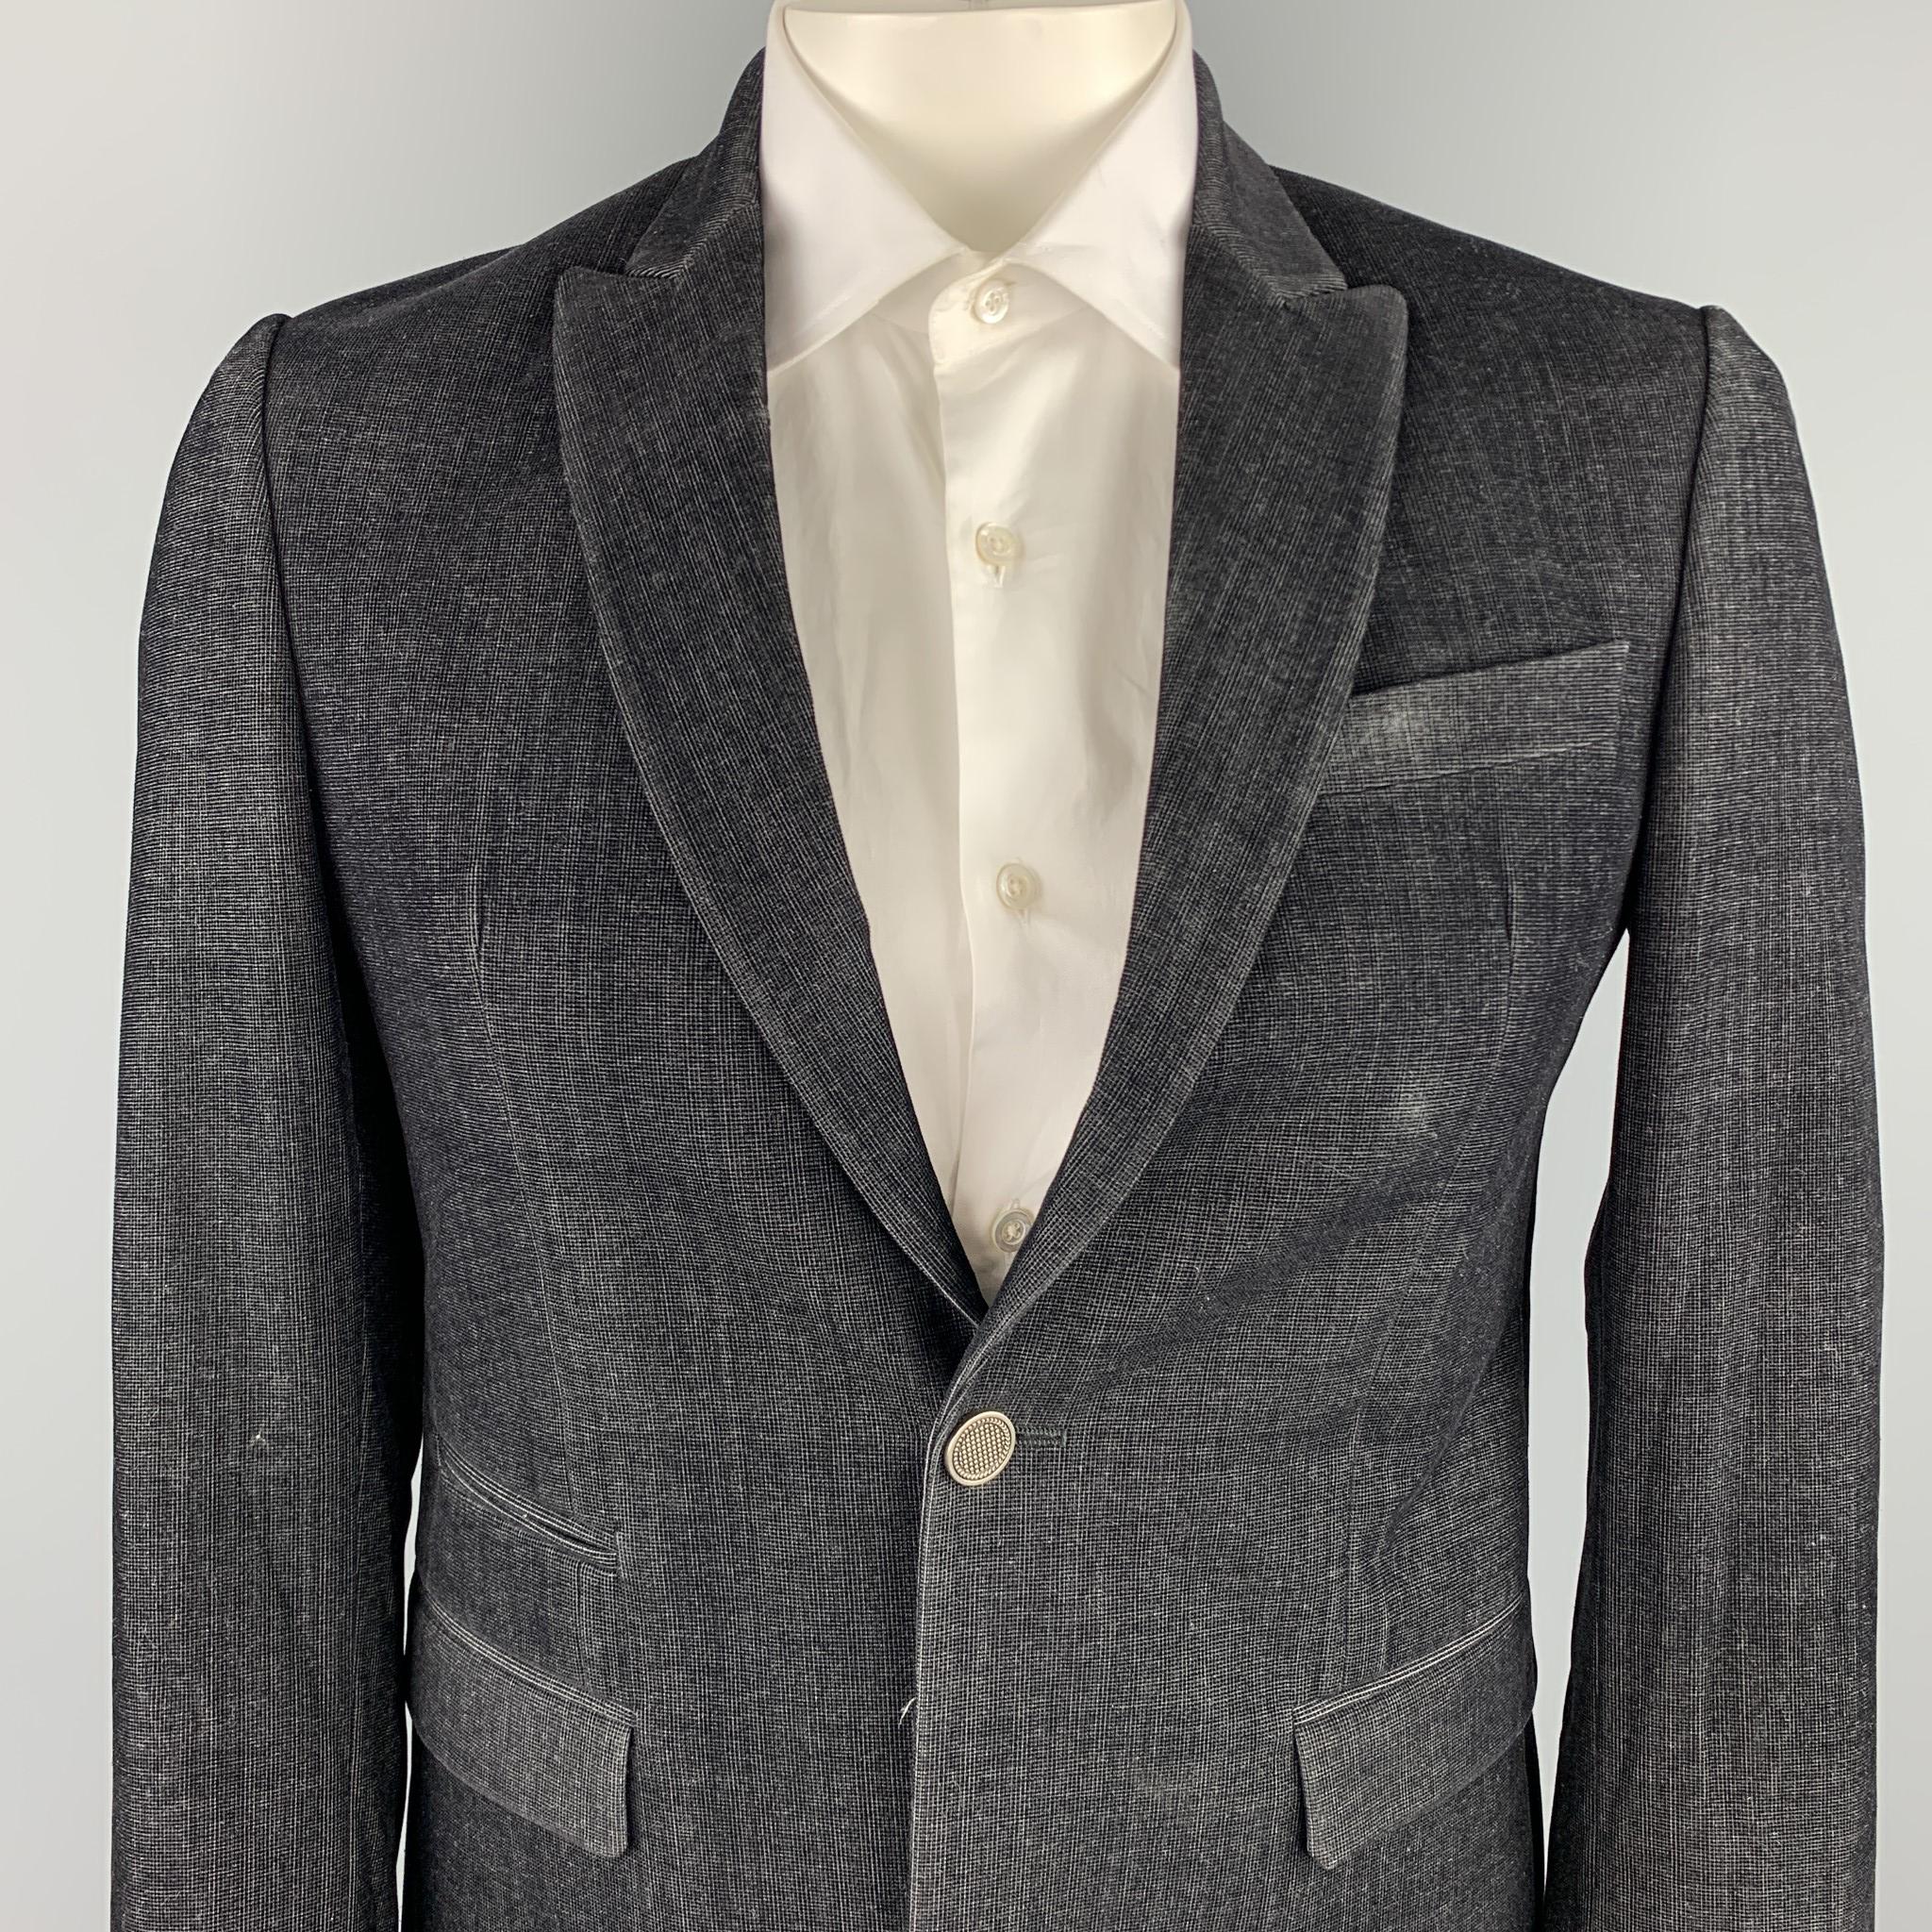 JUST CAVALLI sport coat comes in a black textured polyester blend with a full monogram liner featuring a peak lapel, flap pockets, and a single button closure. Made in Italy.

Excellent Pre-Owned Condition.
Marked: IT 50

Measurements:

Shoulder: 18